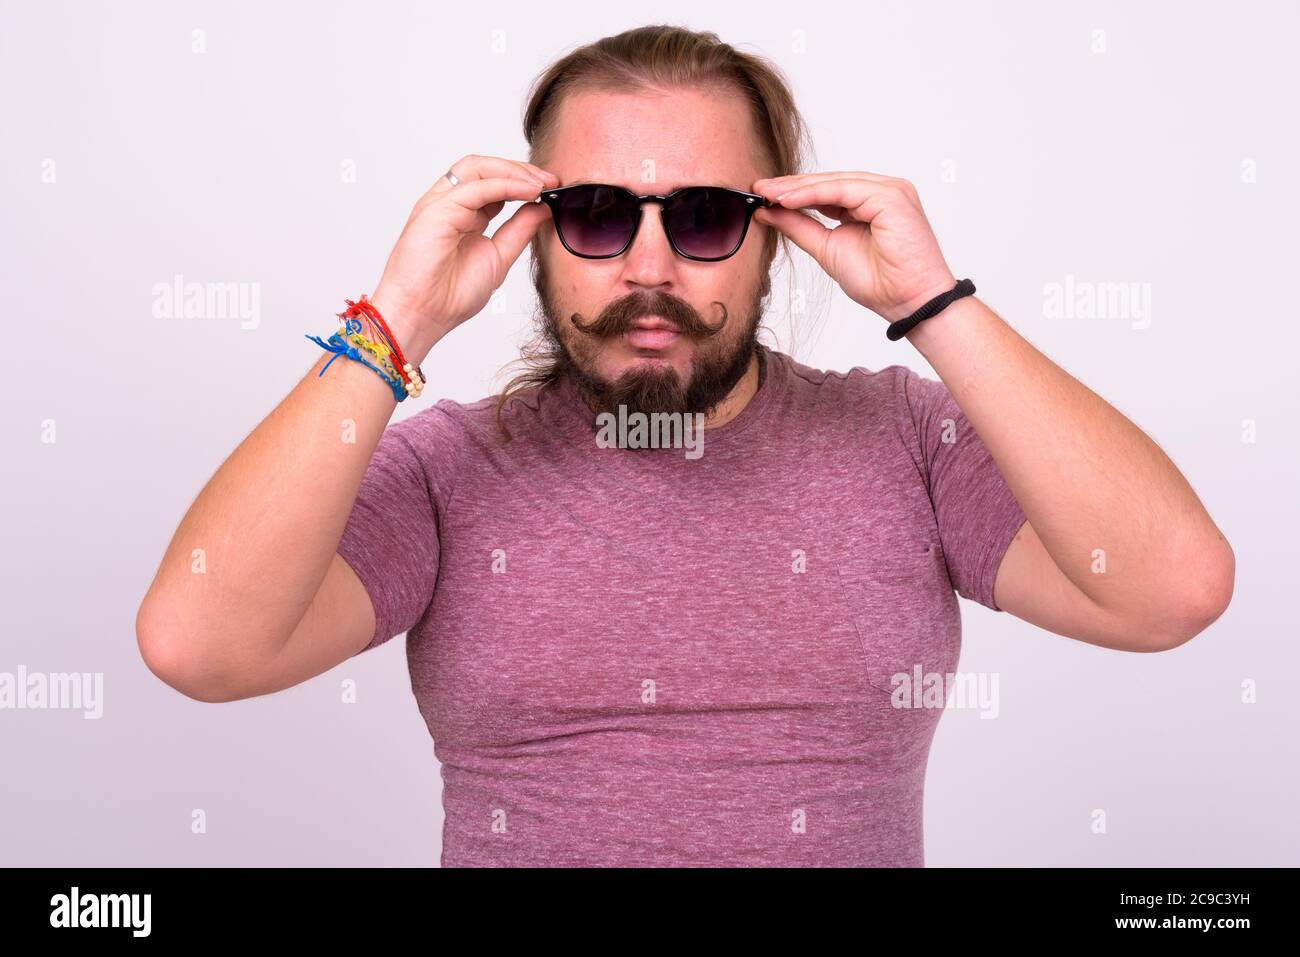 Bearded man with mustache and long hair against white background Stock Photo